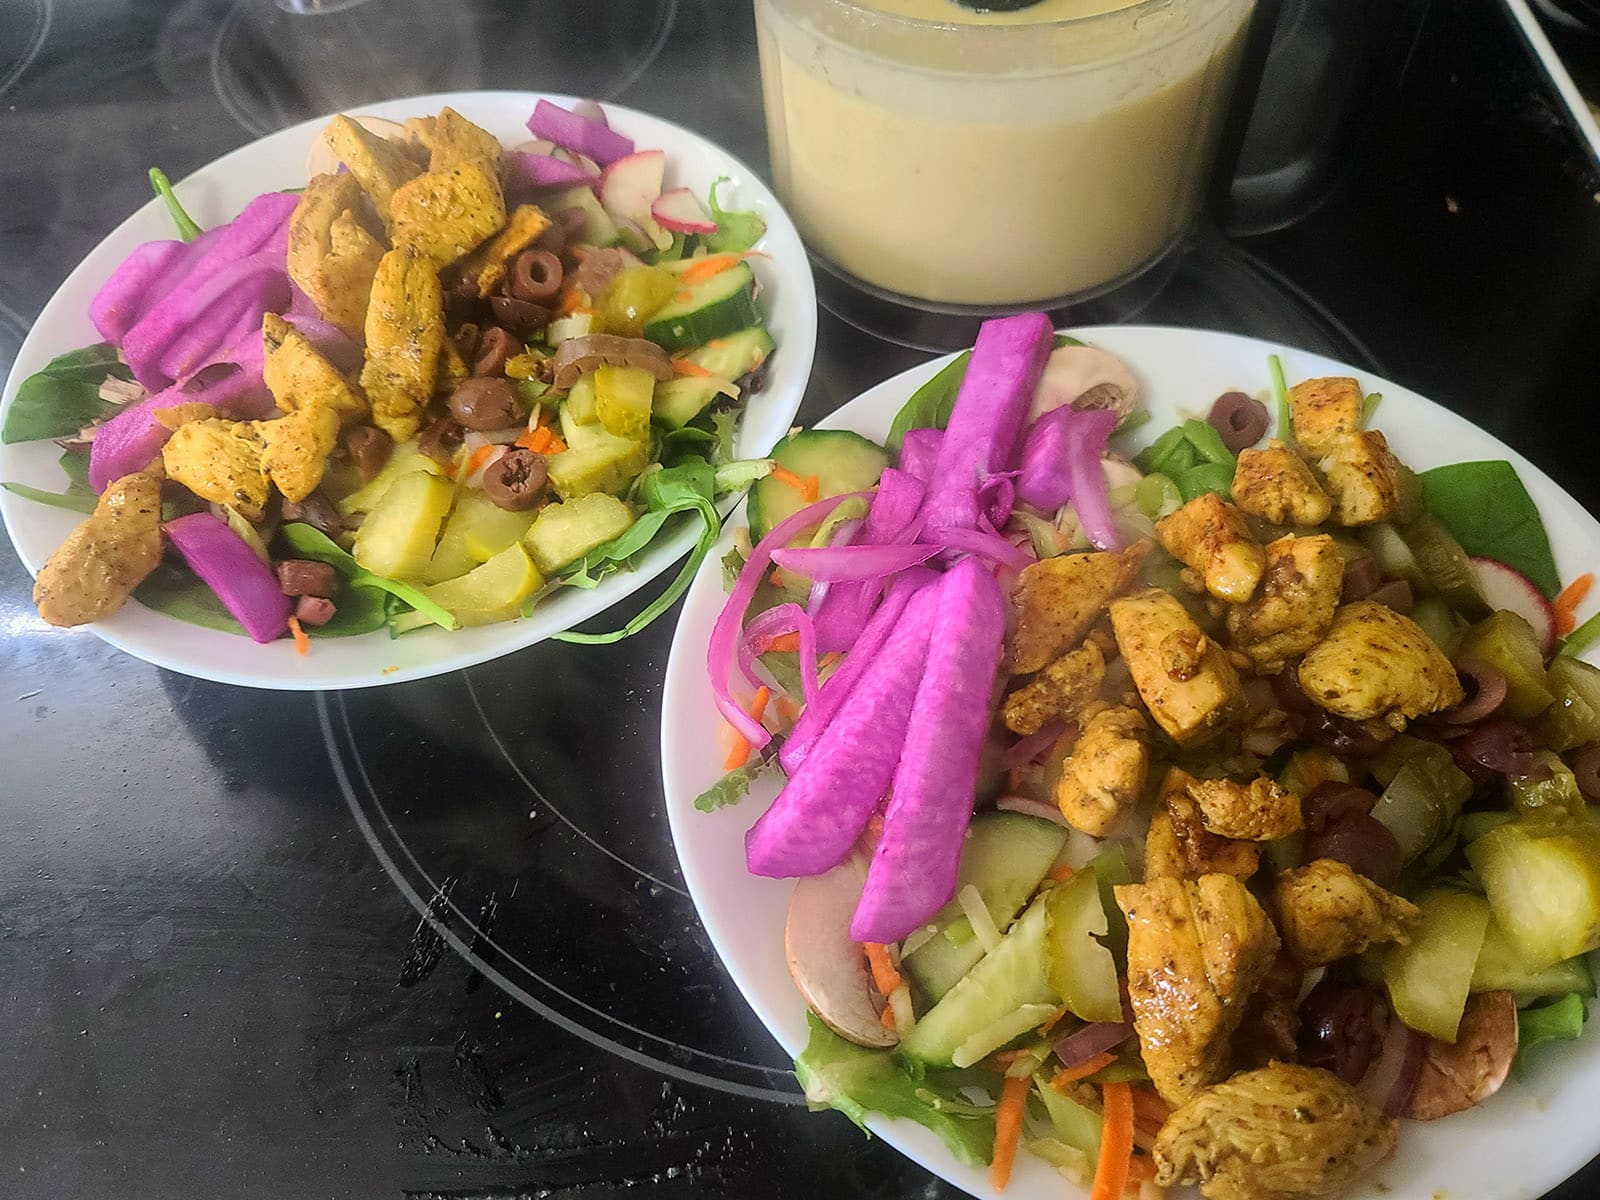 Two bowls of salad with shawarma chicken and bright pink pickled turnips.